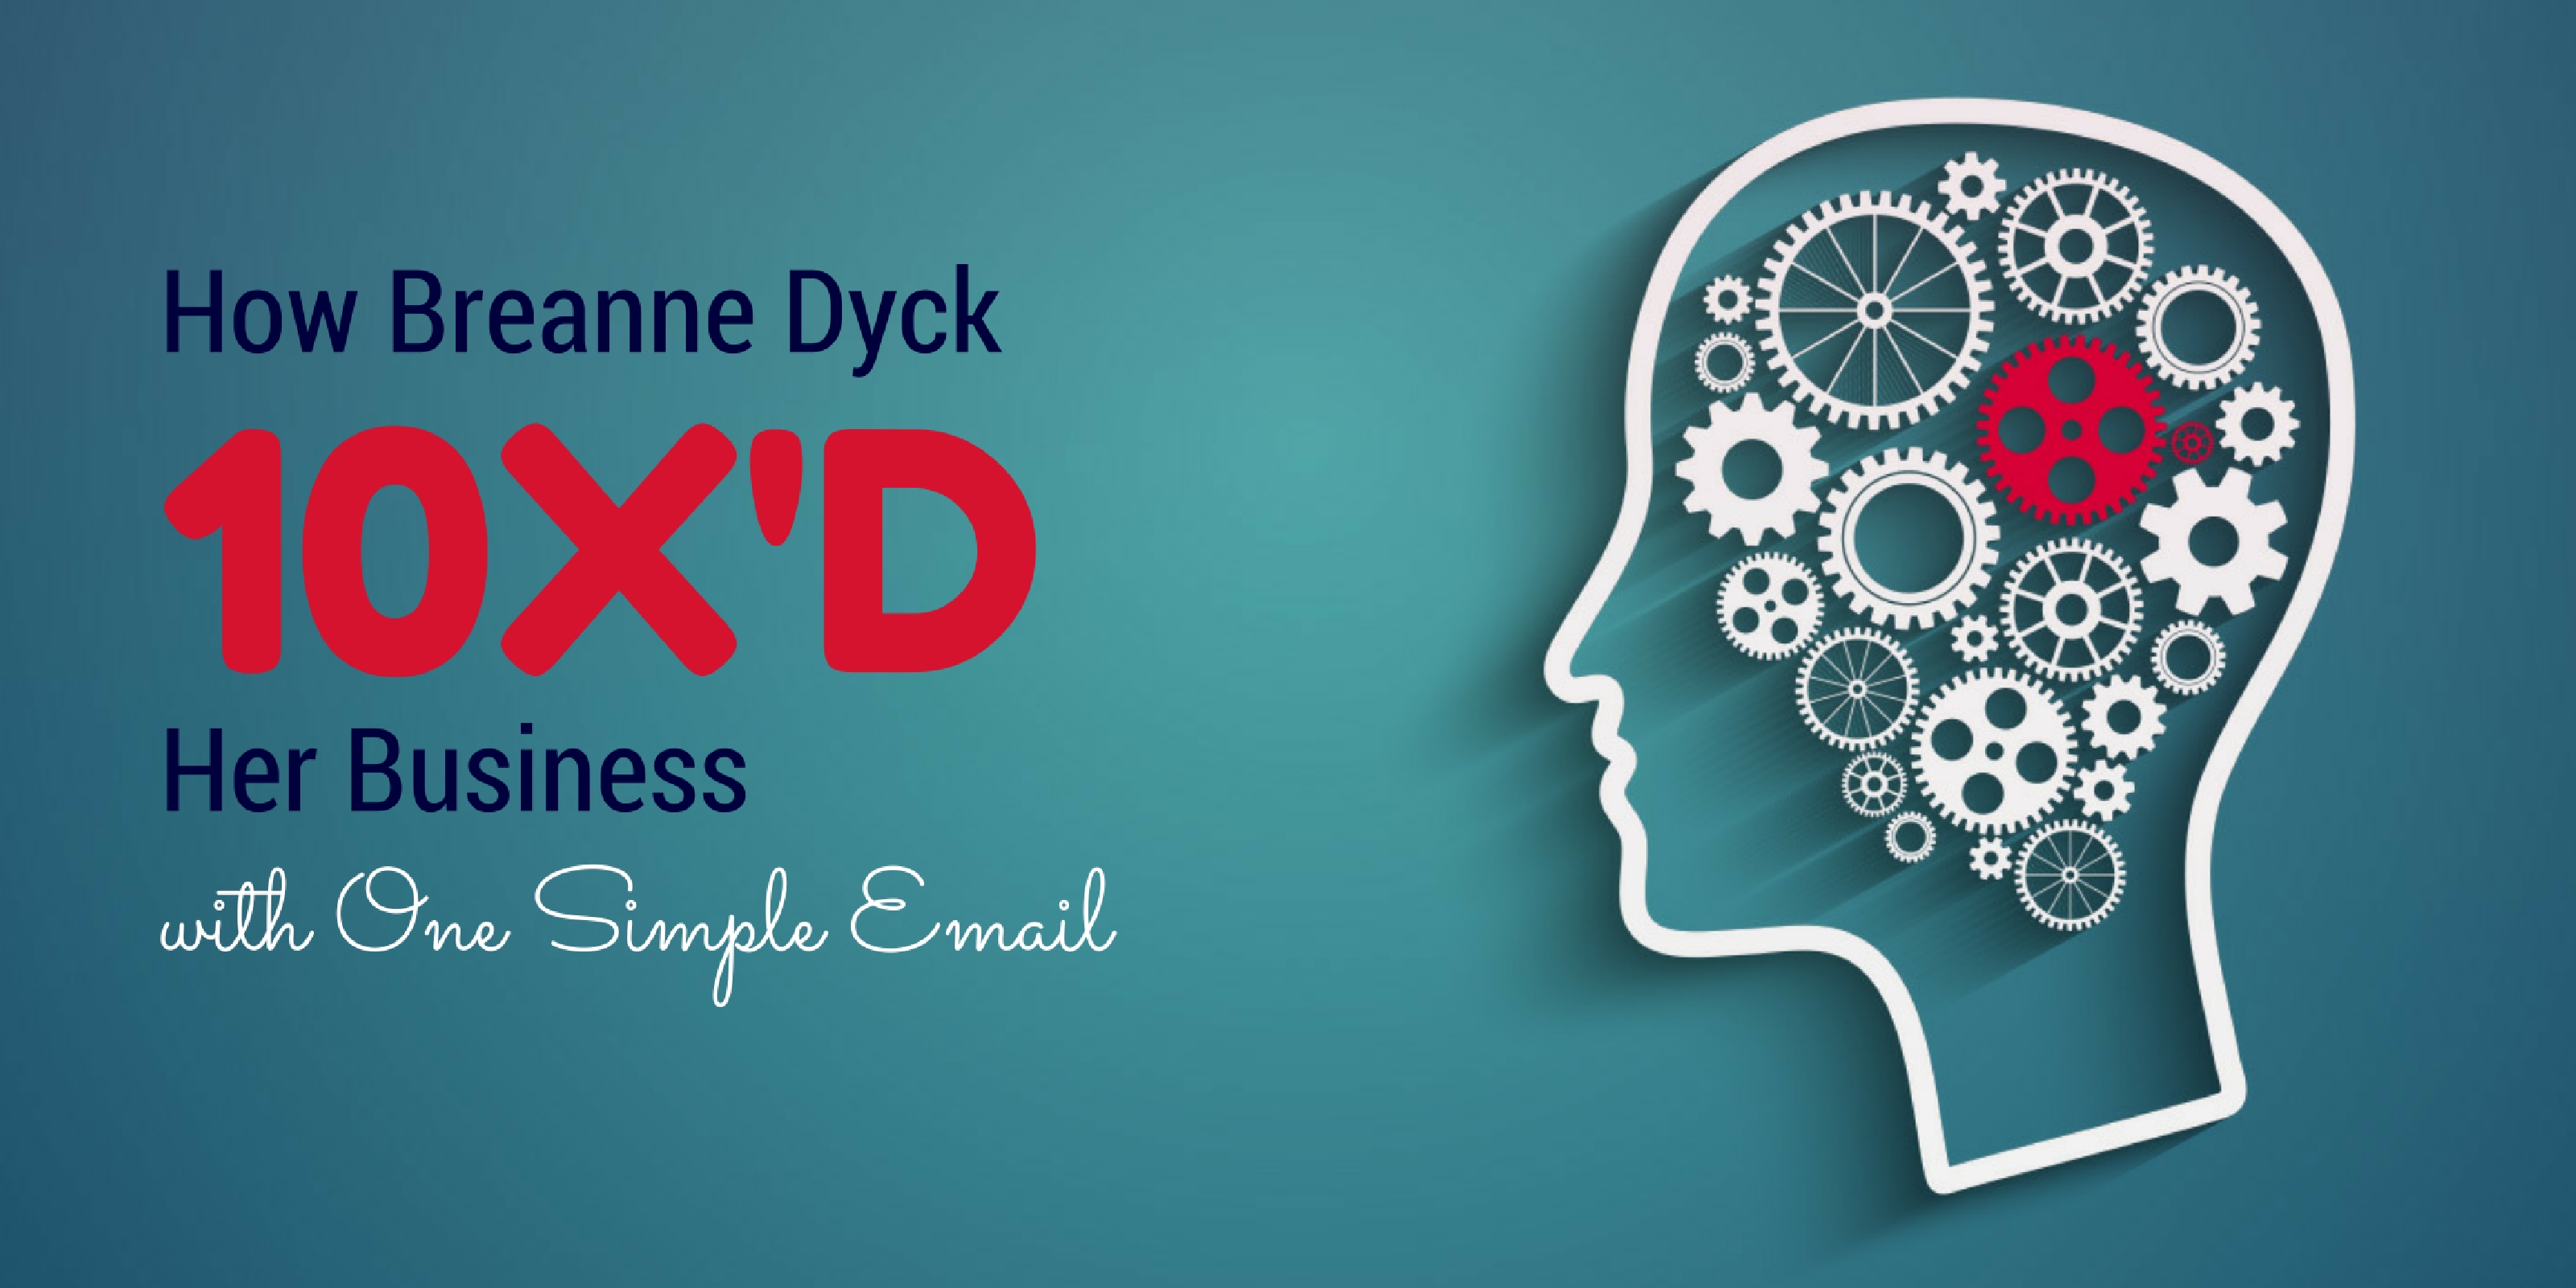 Email strategy for Breanne Dyck